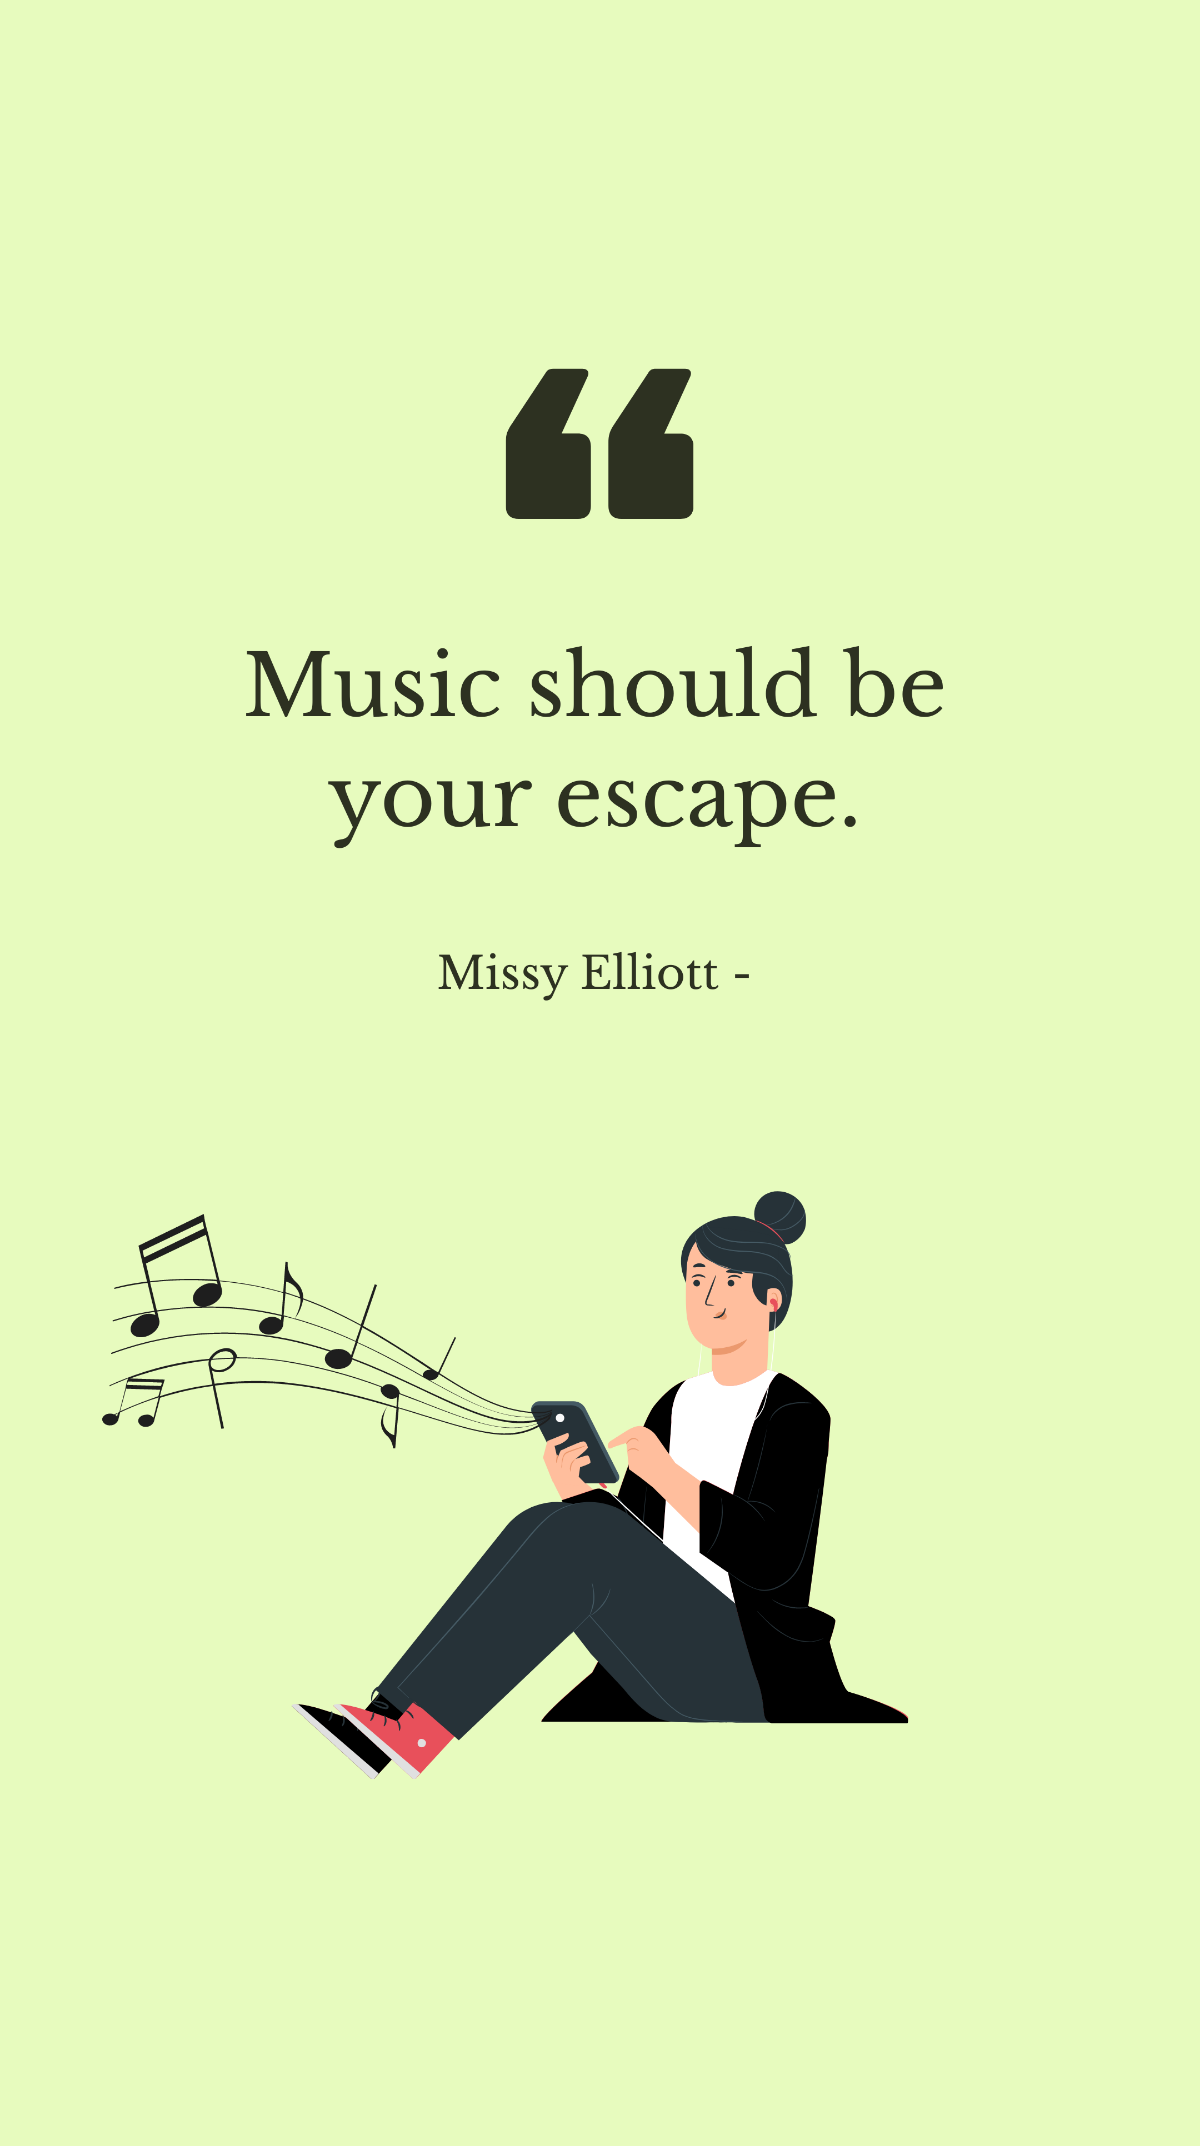 Missy Elliott - Music should be your escape. Template